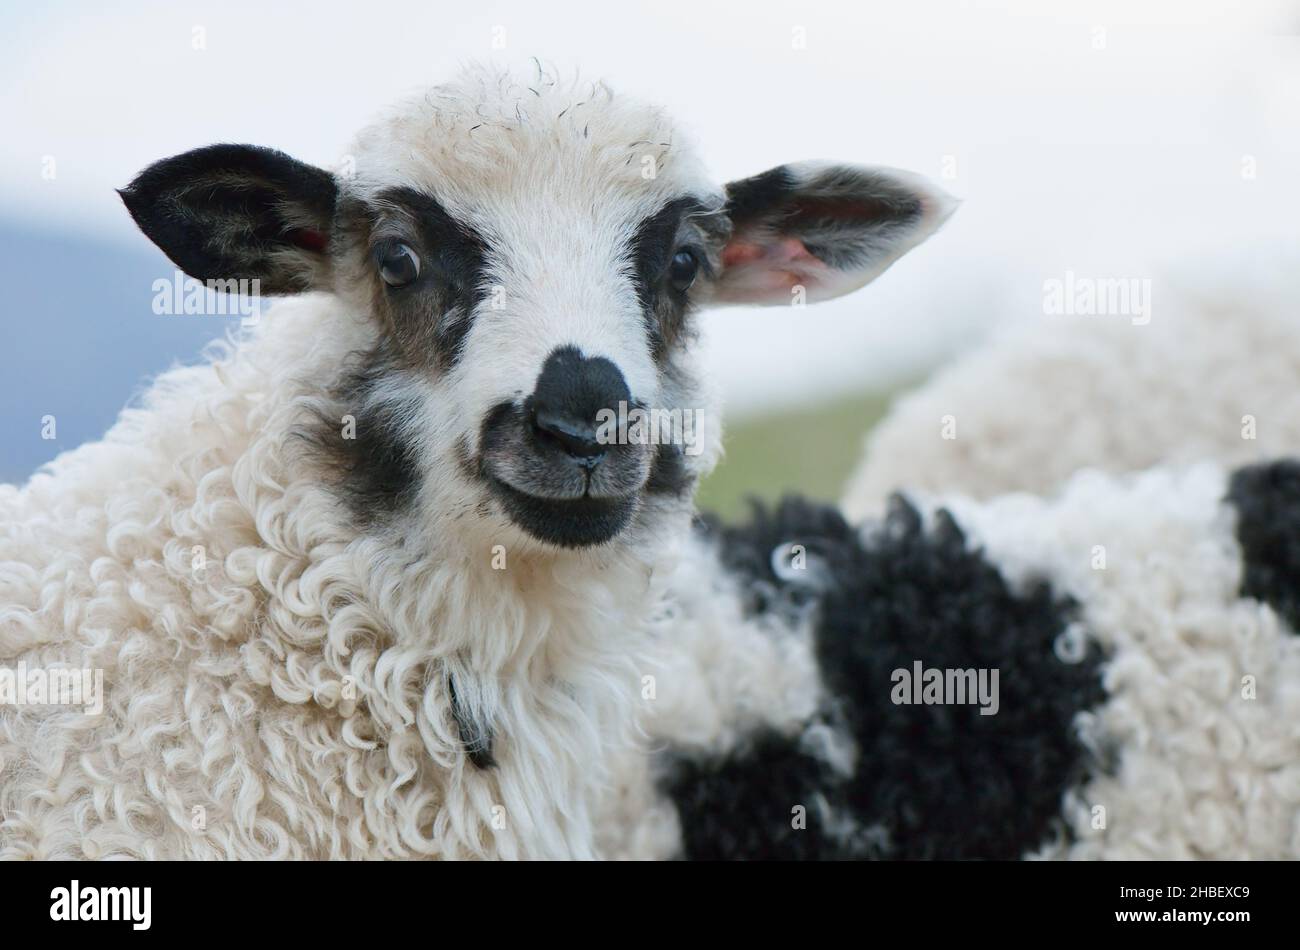 Portrait of a young sheep Stock Photo